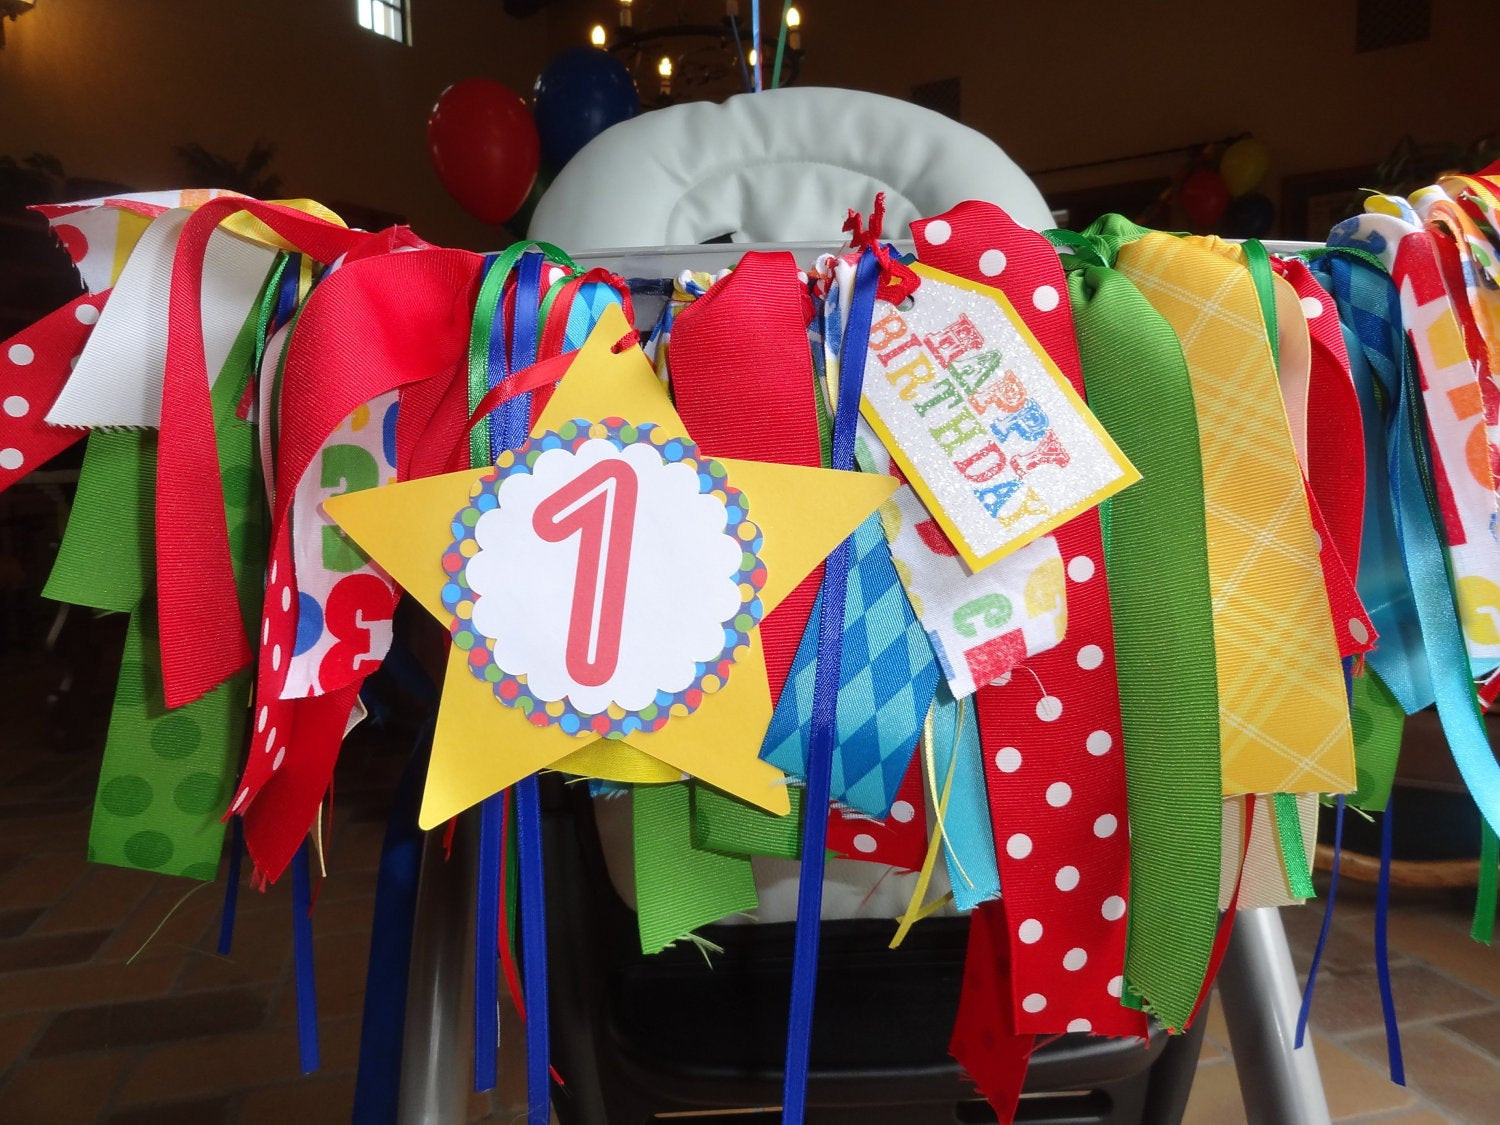 High Chair Birthday Decorations
 Primary Color ribbon high chair banner photo prop party